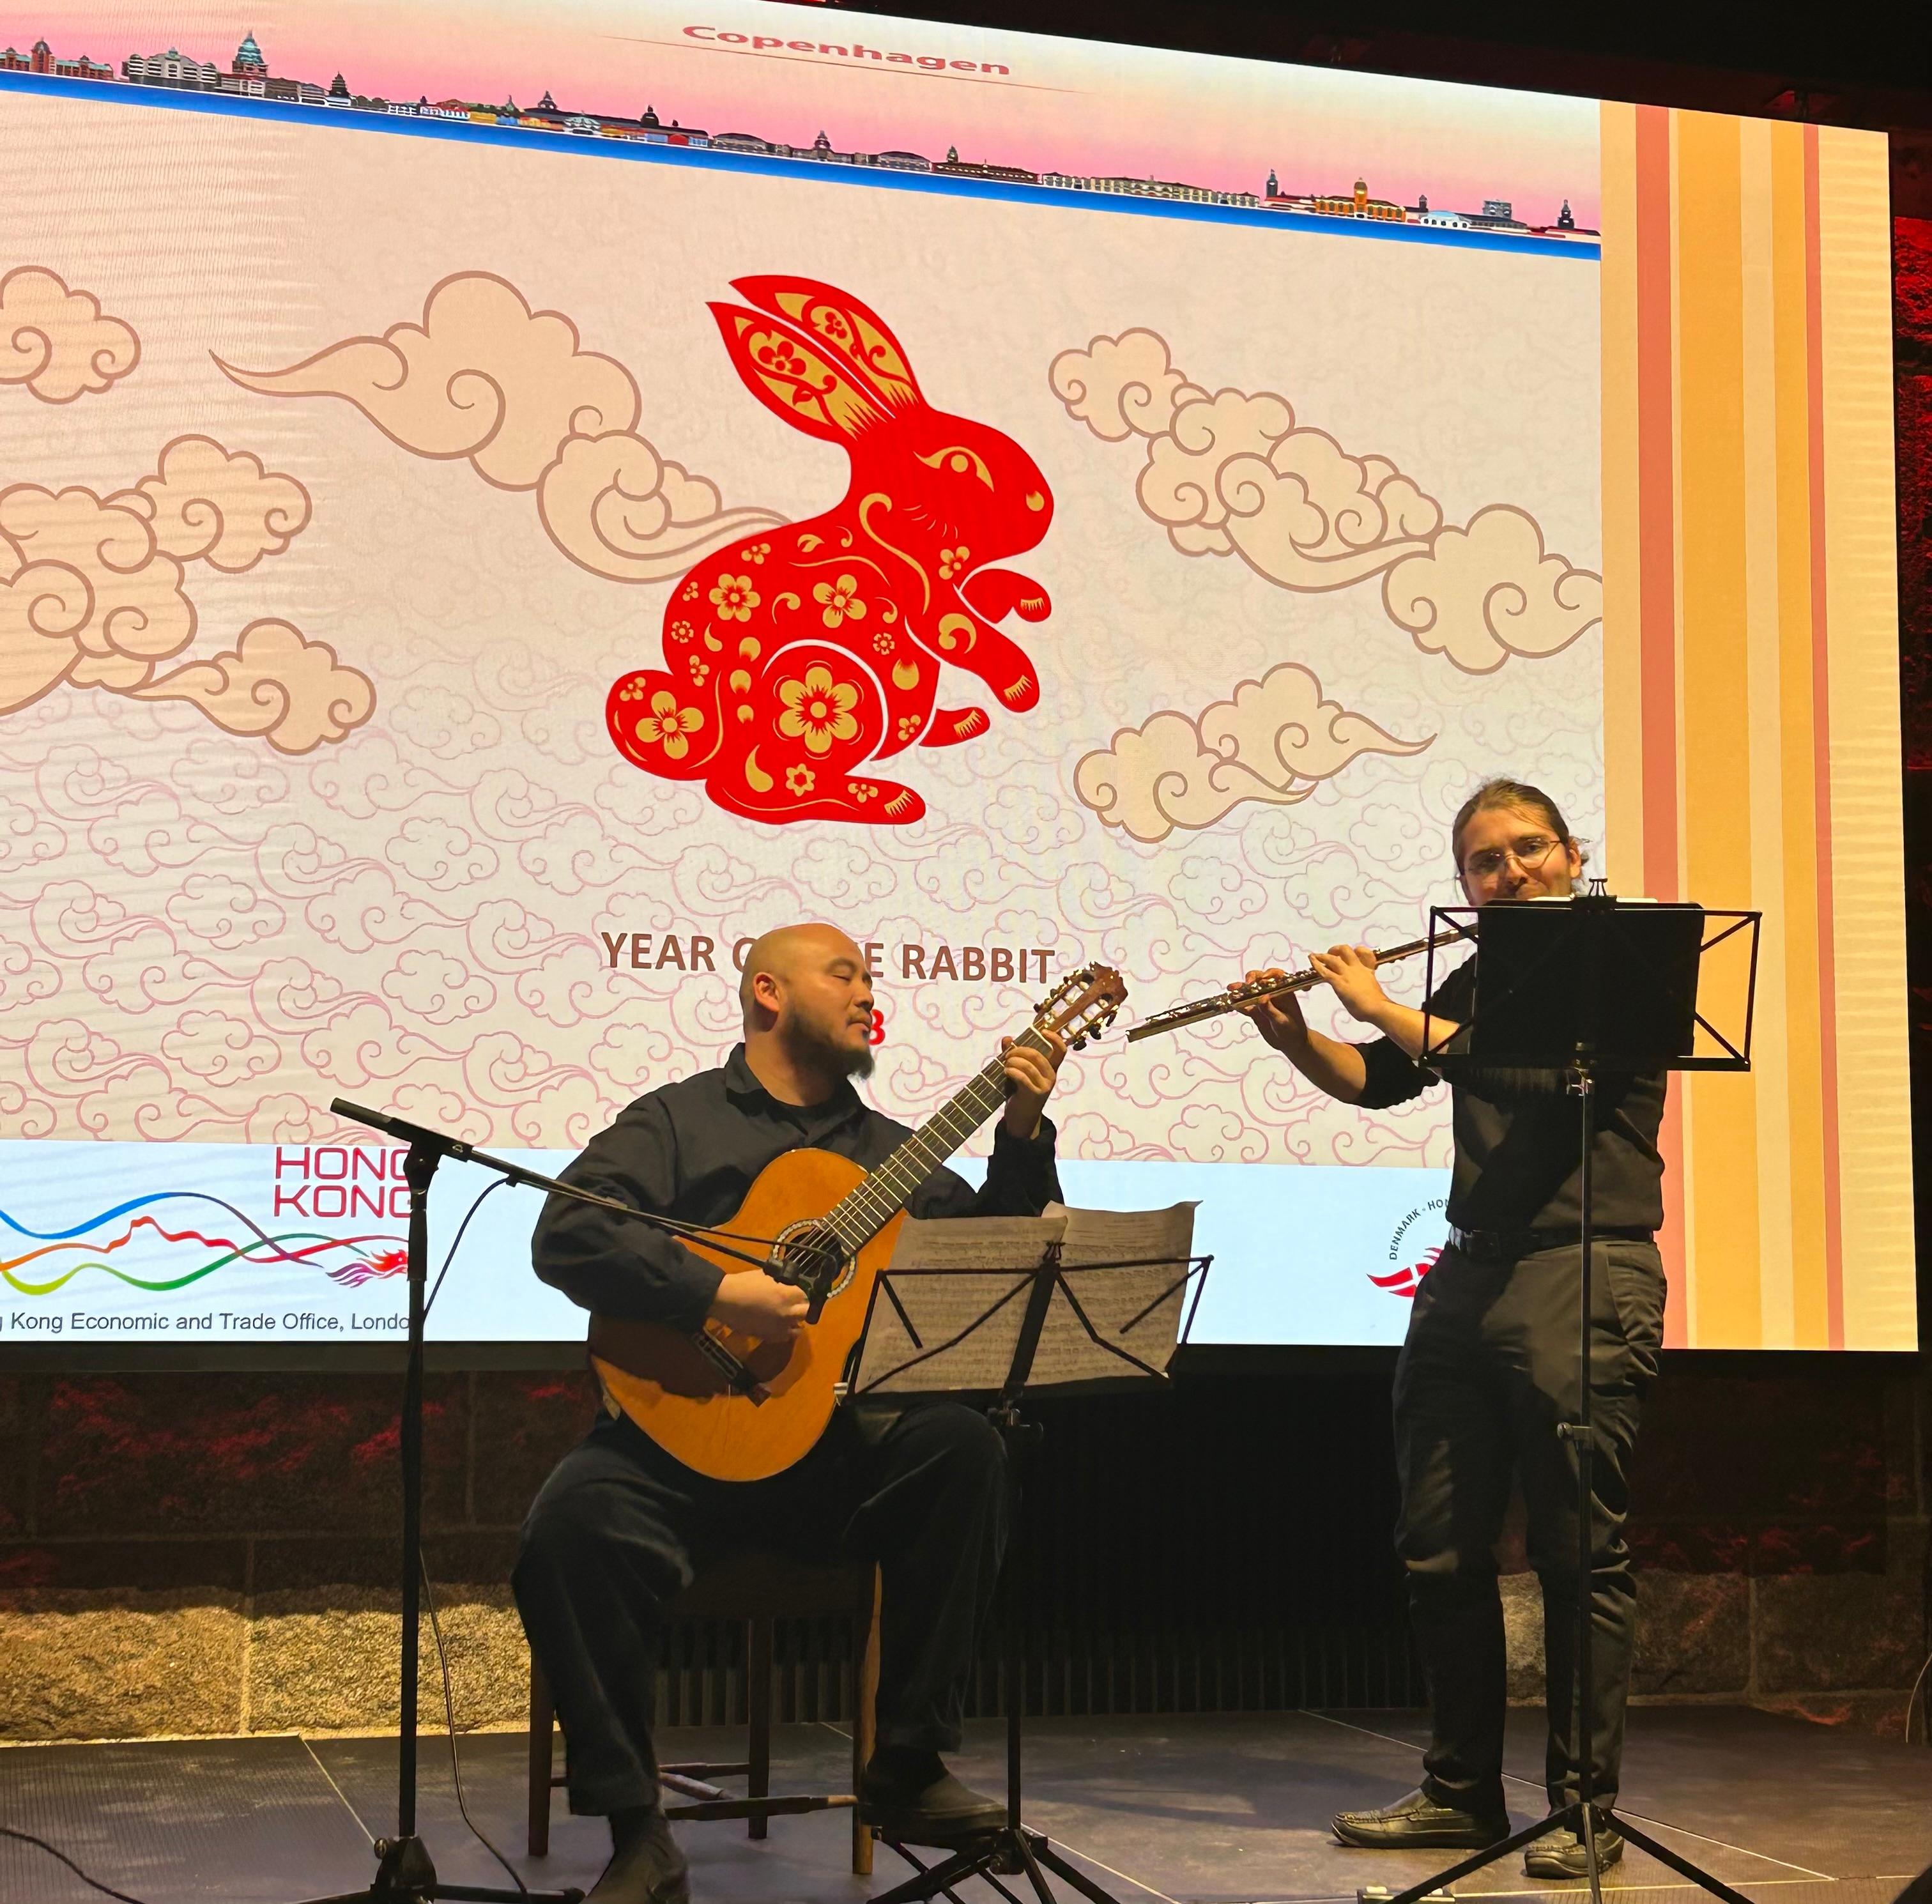 The Hong Kong Economic and Trade Office, London co-hosted receptions in Copenhagen, Denmark, and Stockholm, Sweden, with local business associations on February 7 and 8 respectively for celebrating the Year of the Rabbit. Photo shows the music performance at the Copenhagen reception.